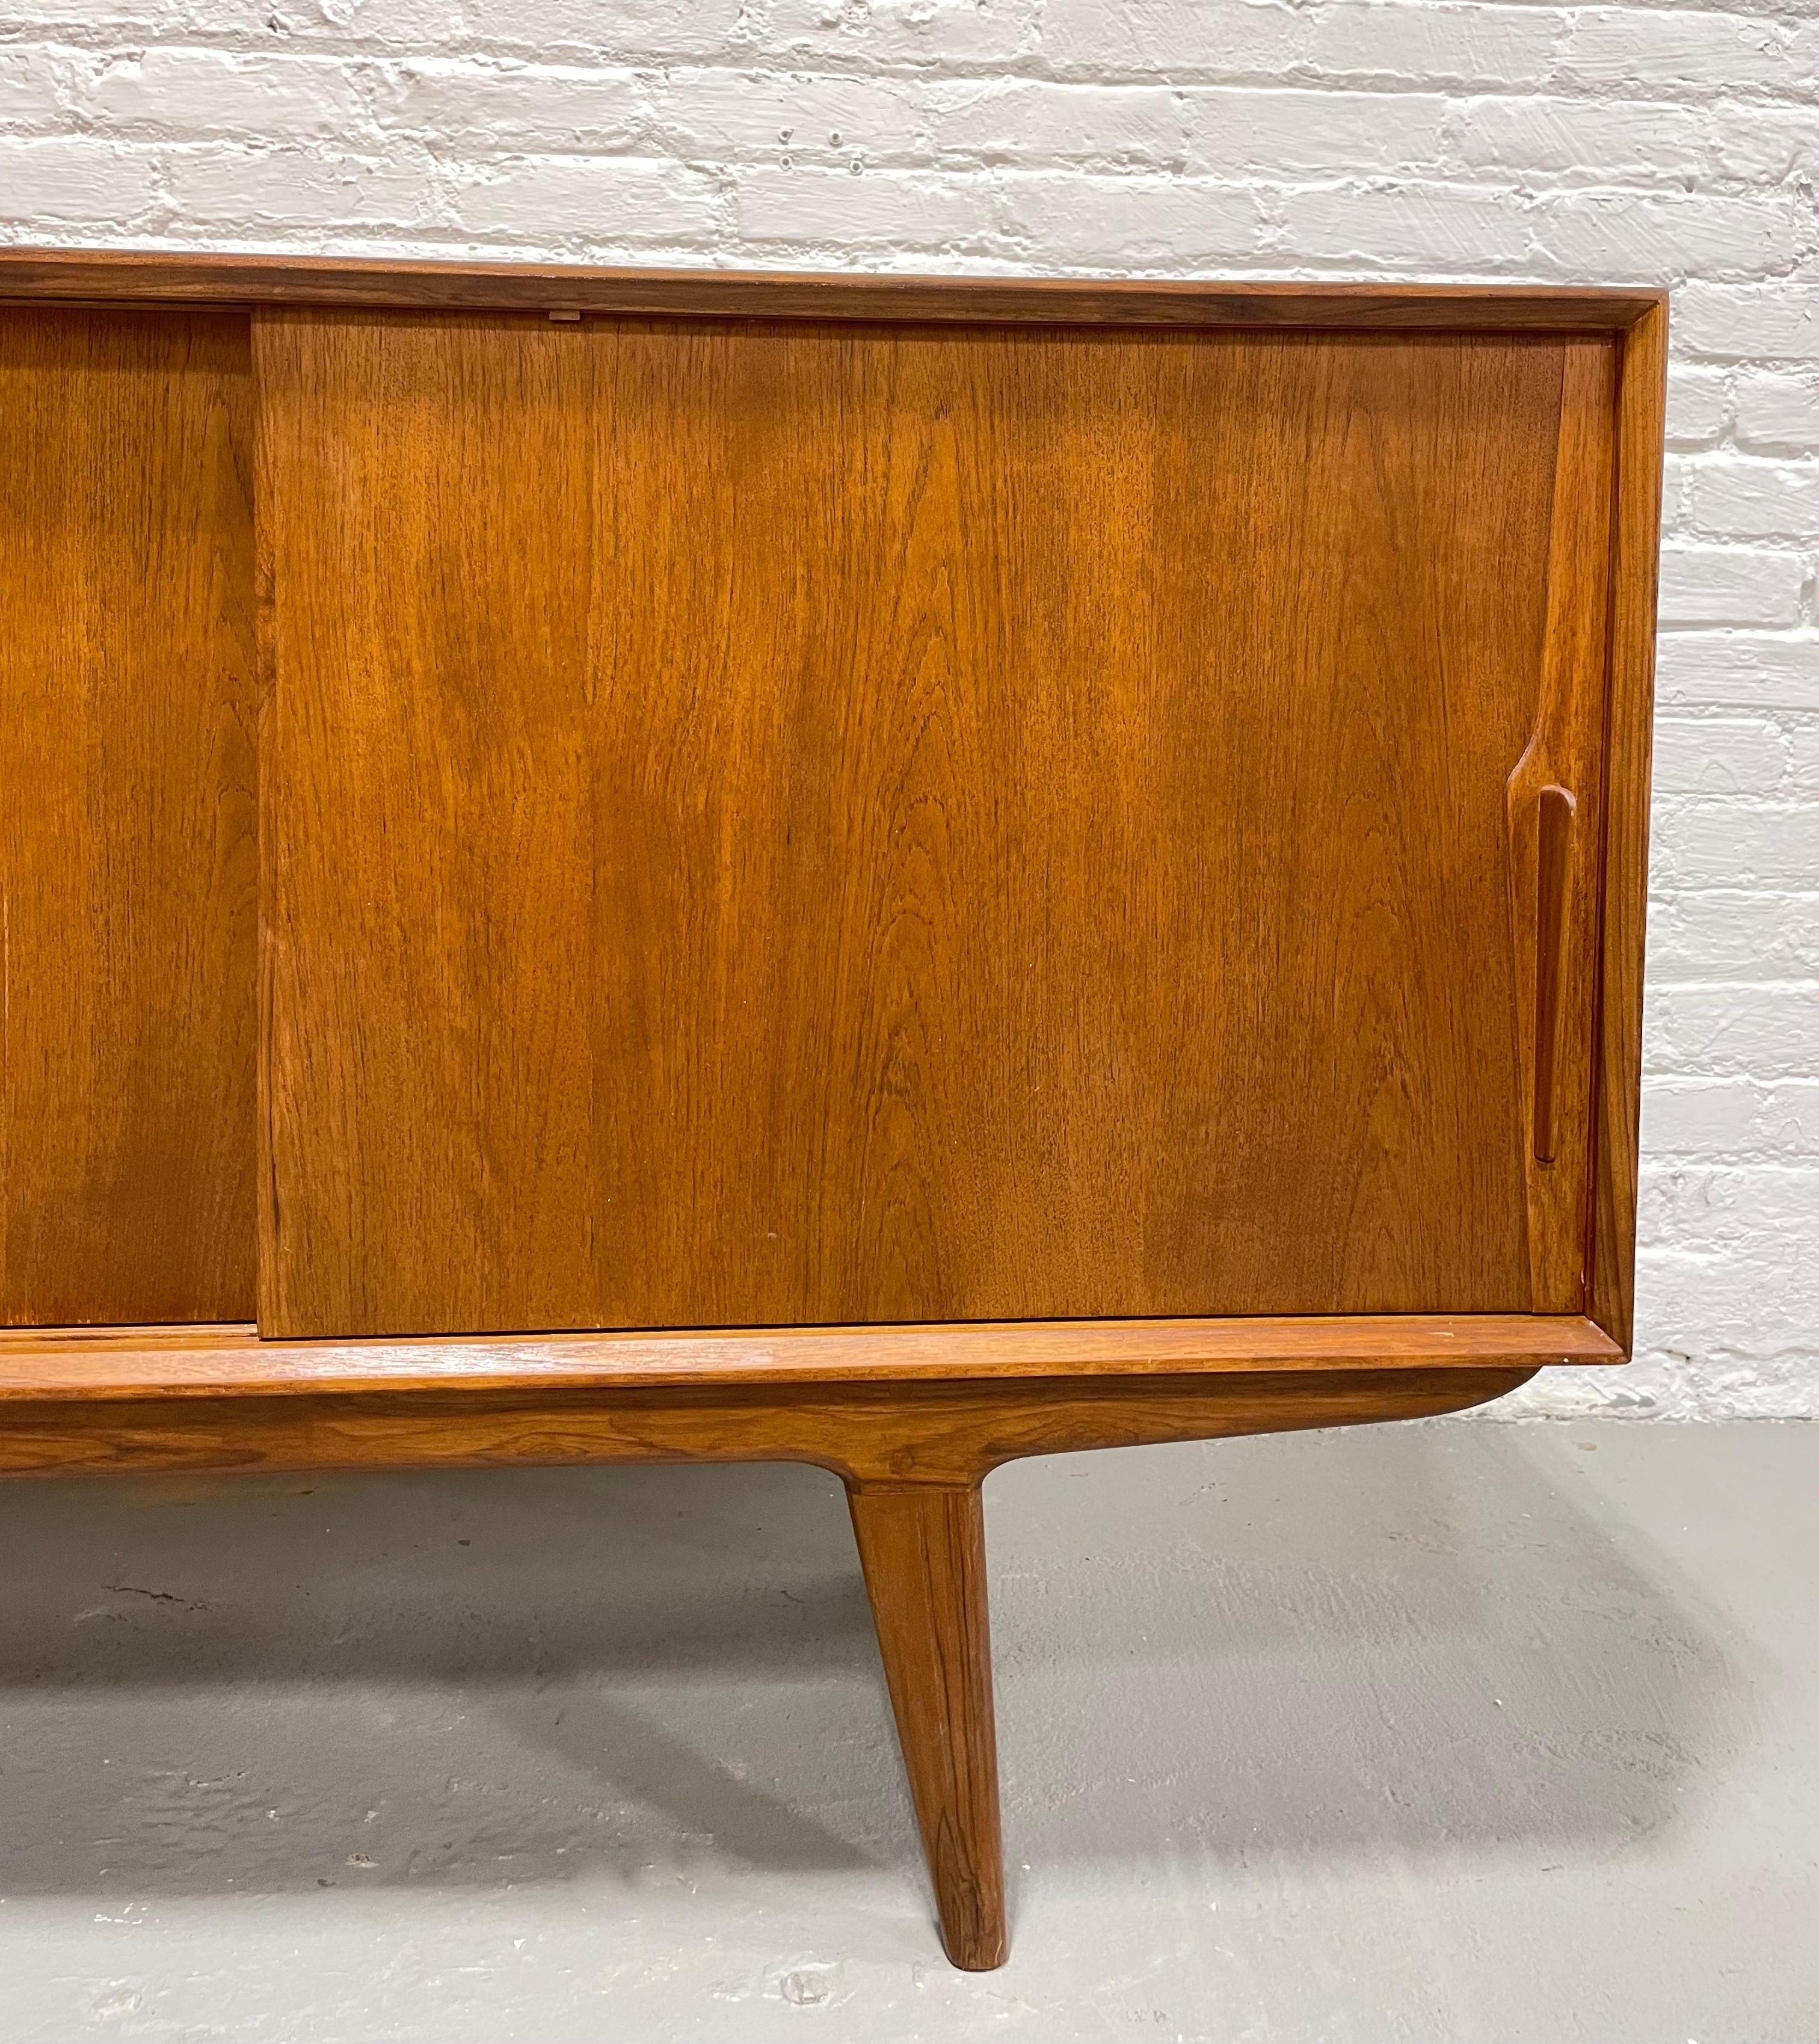  Handsome Mid Century MODERN styled SIDEBOARD / CREDENZA media stand For Sale 6